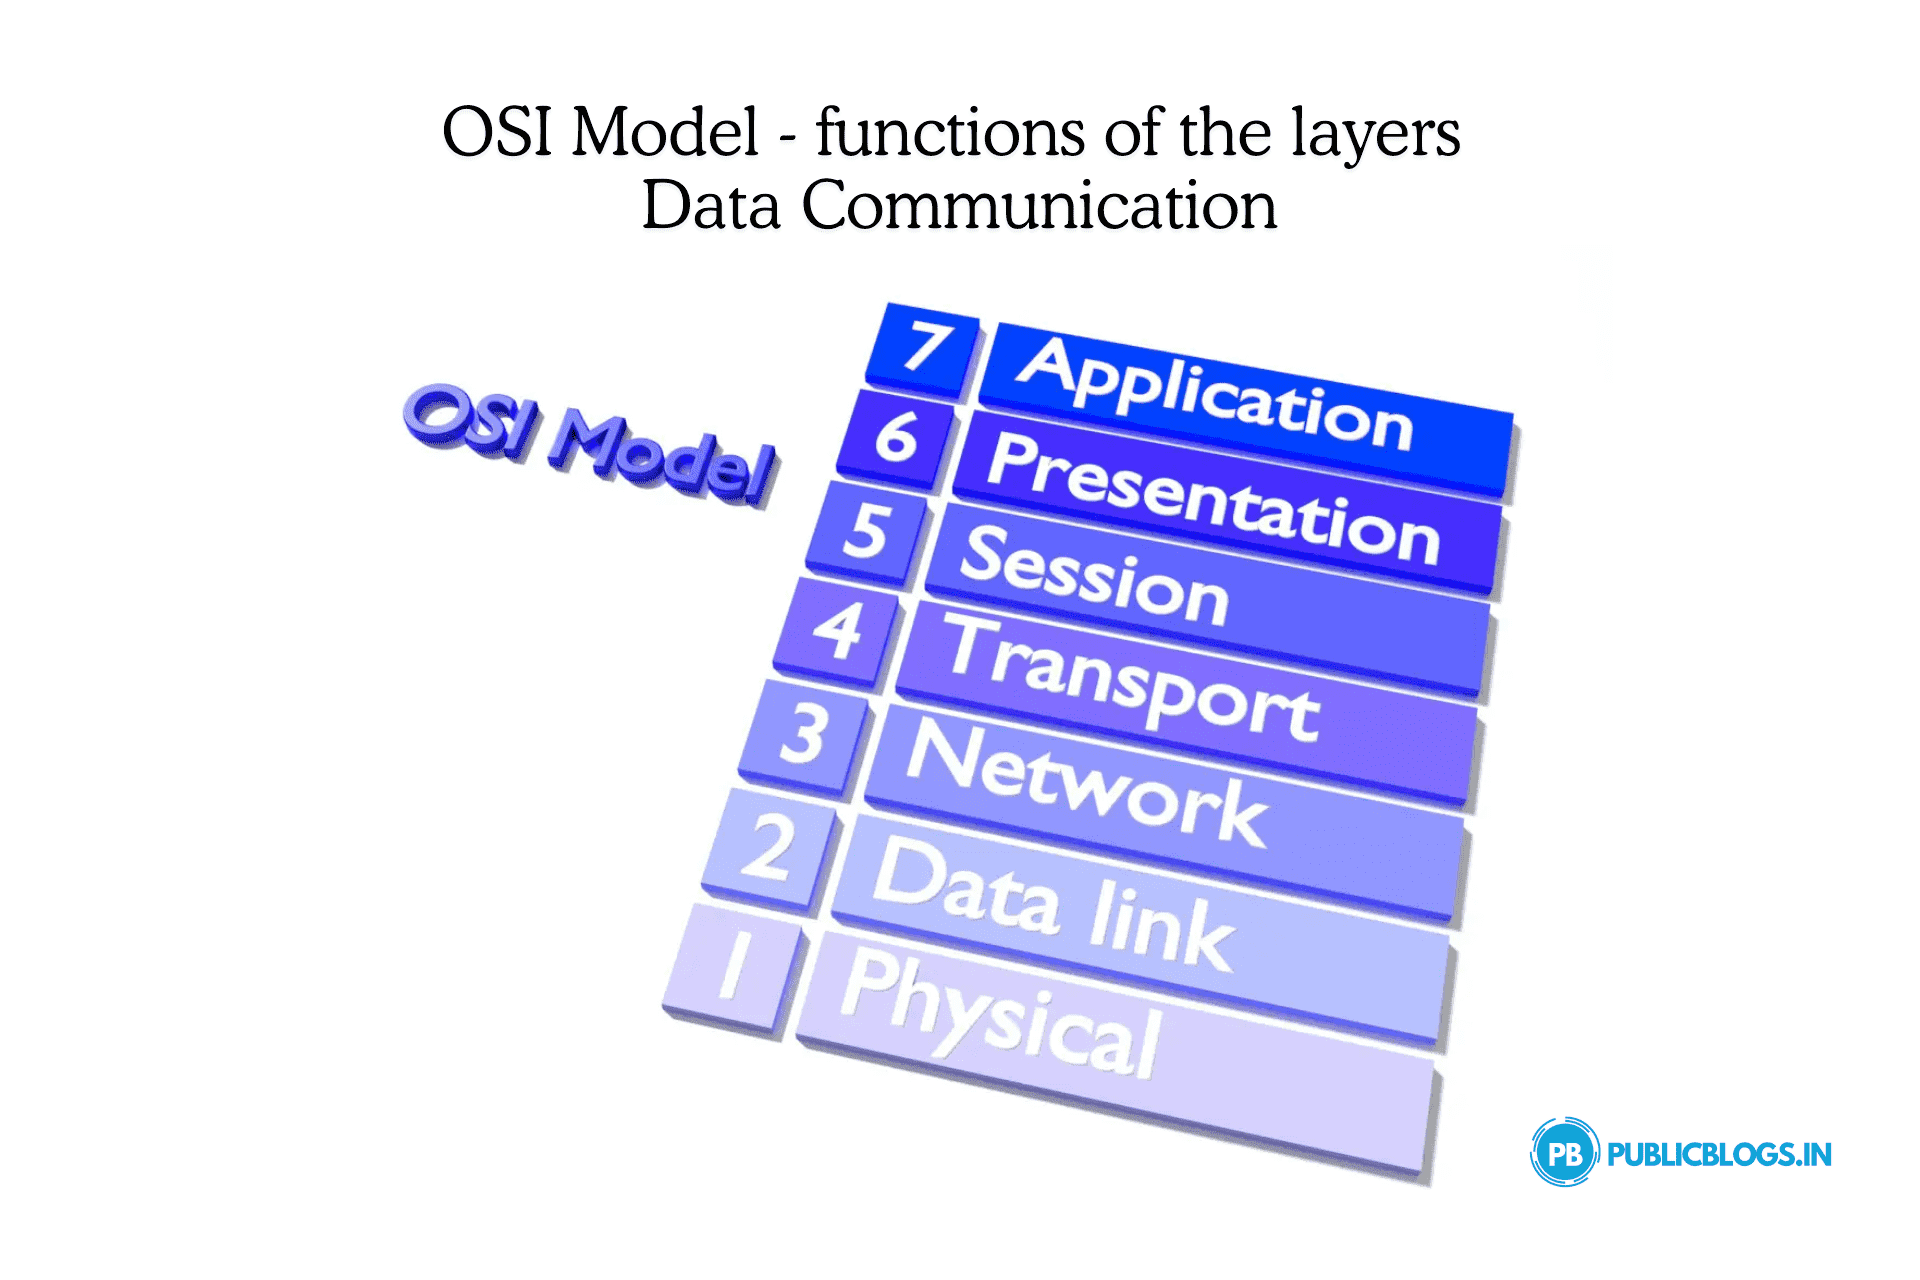 OSI Model - functions of the layers for Data Communication